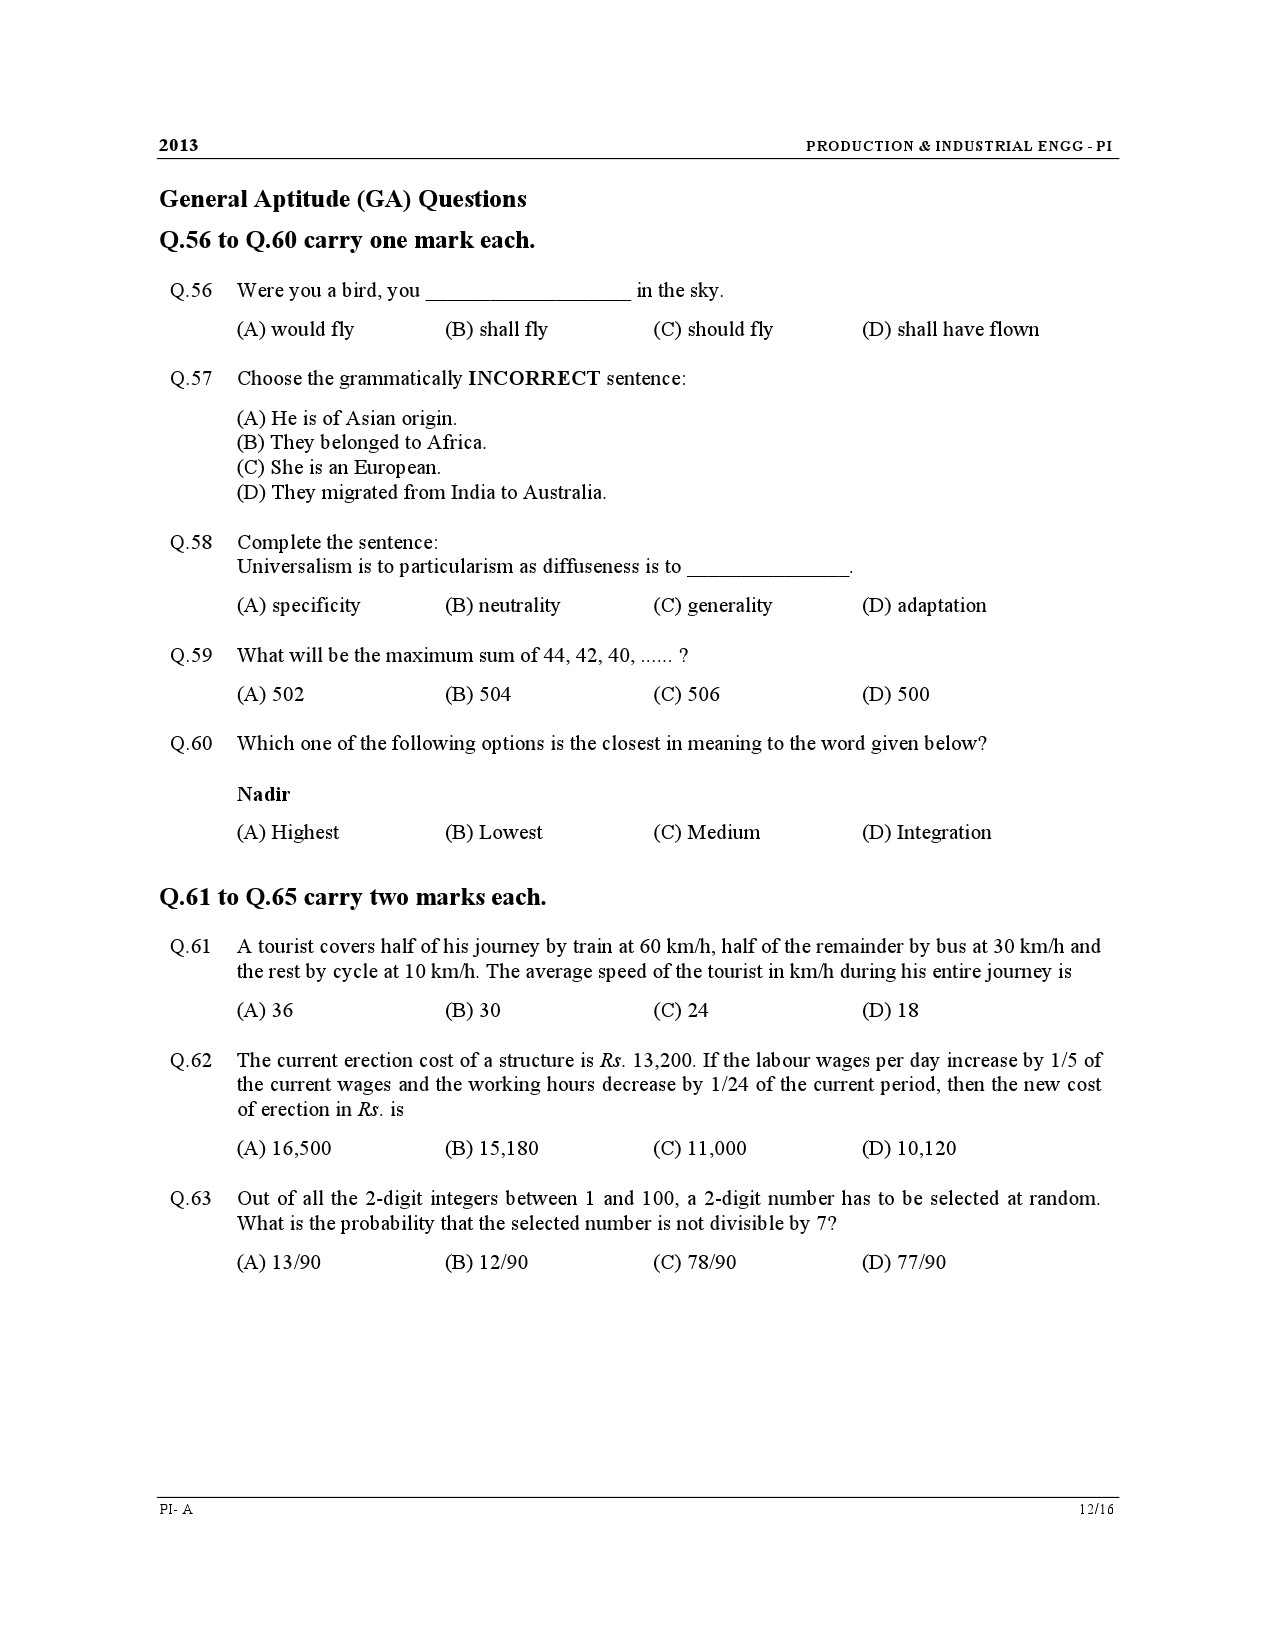 GATE Exam Question Paper 2013 Production and Industrial Engineering 12